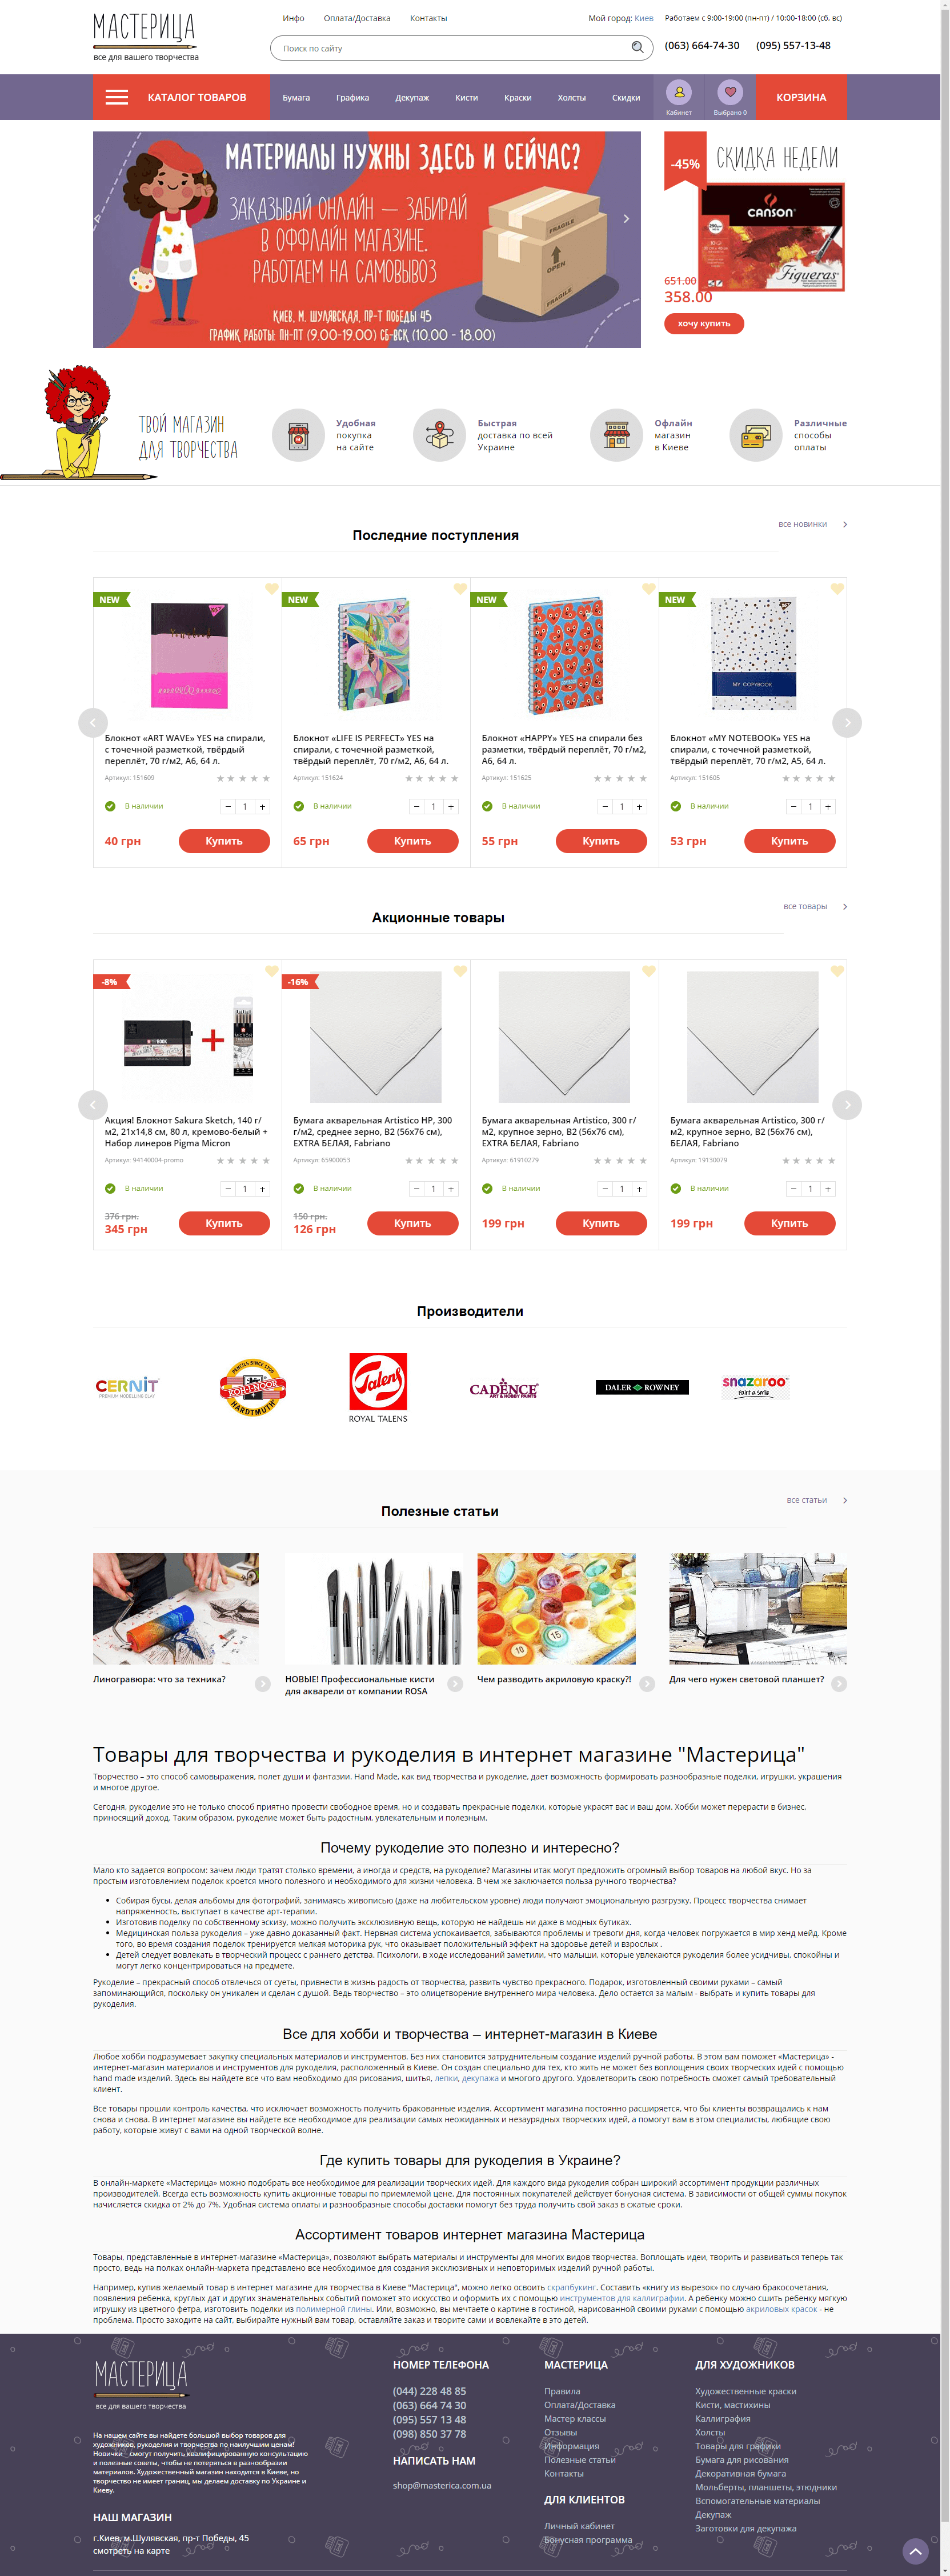 Prize masteritsa: screenshot of the official site